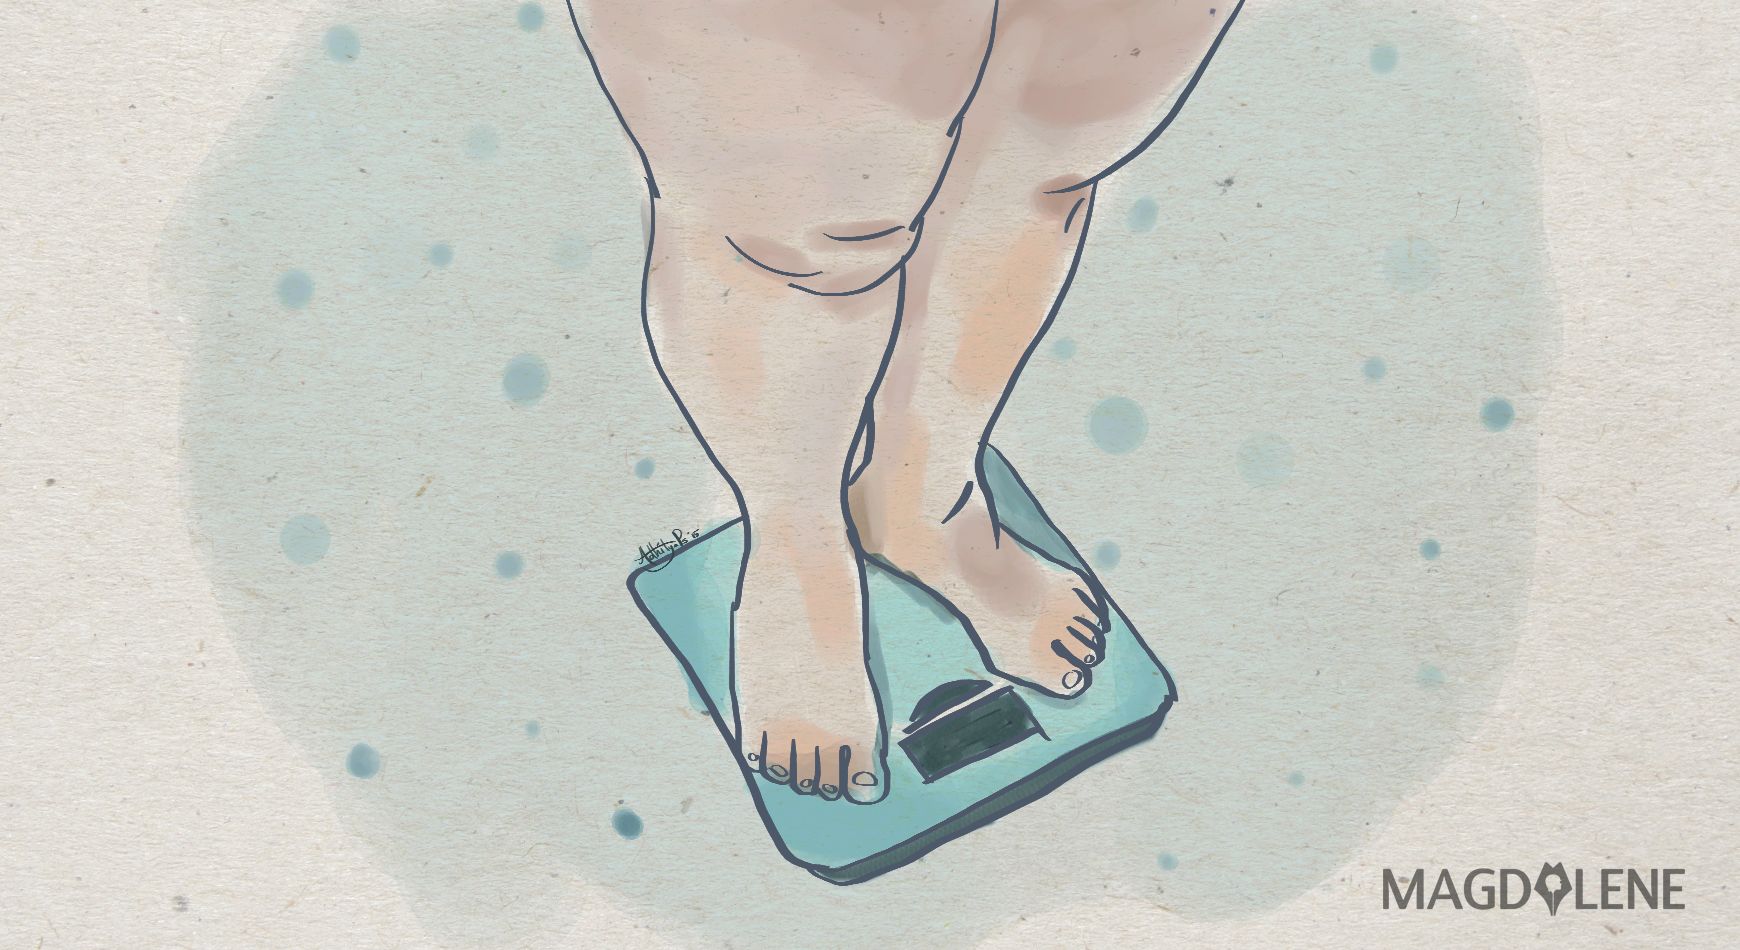 Stop Telling Me I’ve Gained Weight: Ending the Intrusive Norm